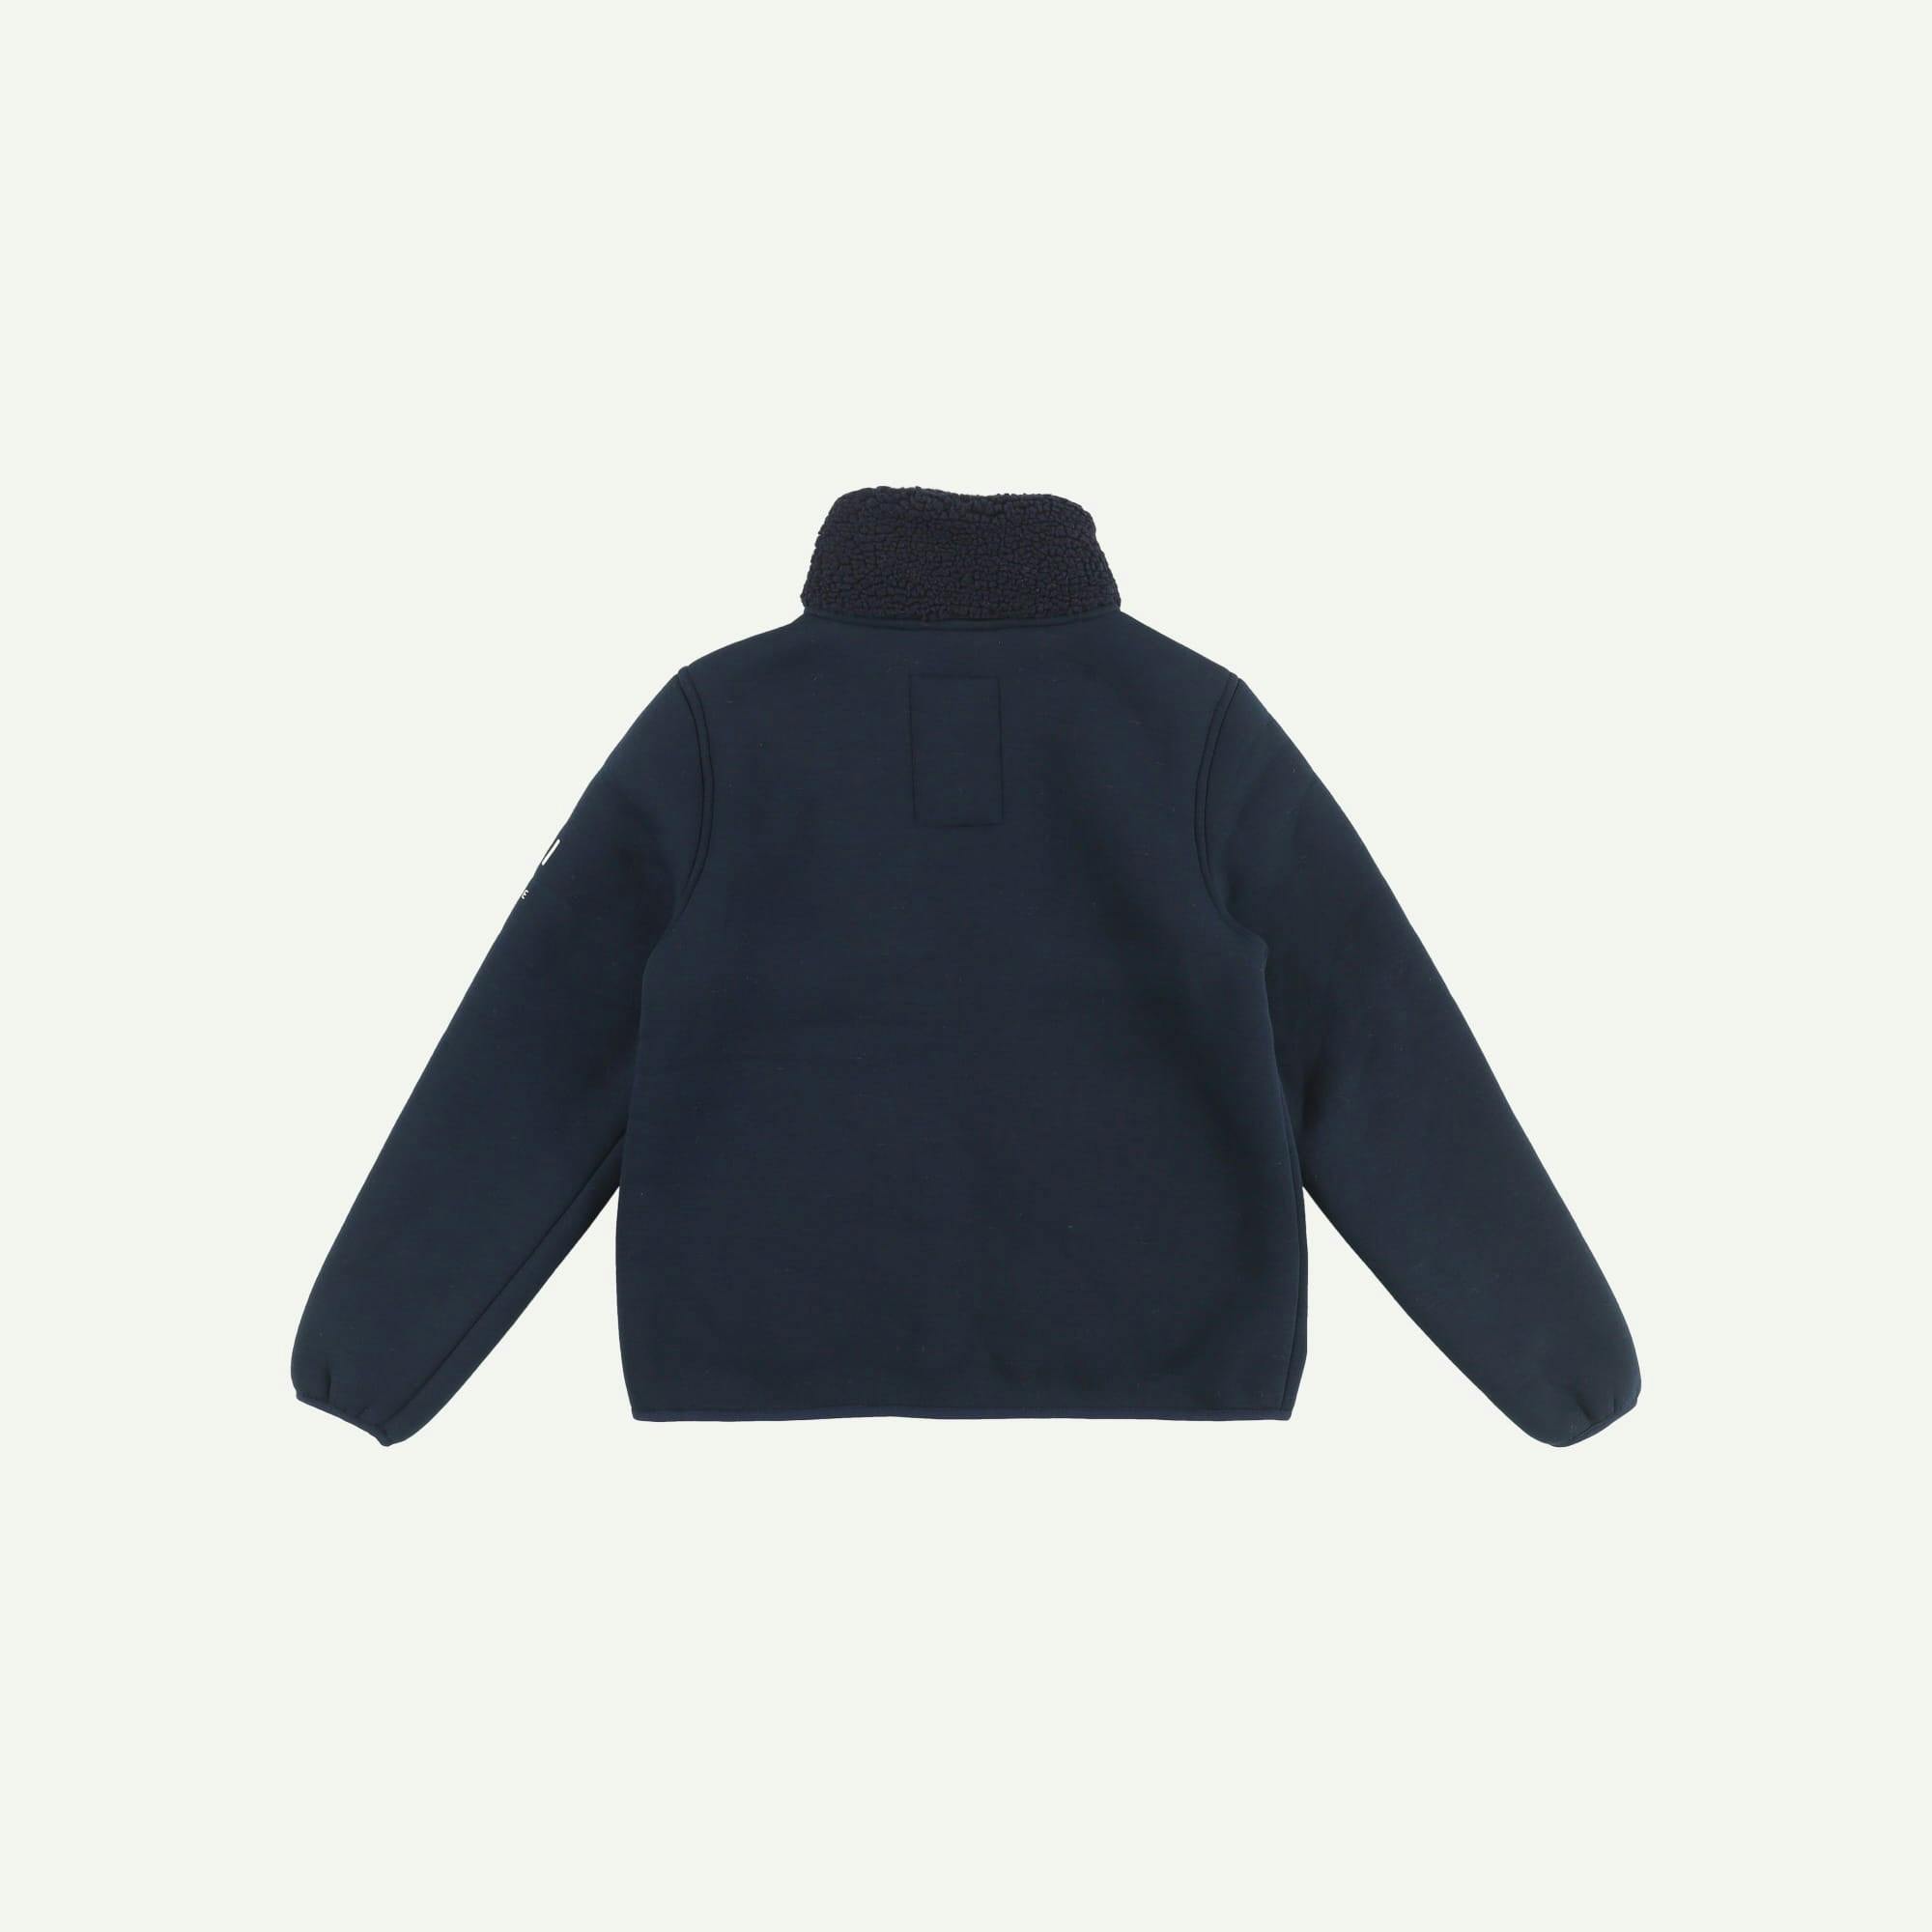 Finisterre As new Blue Jacket